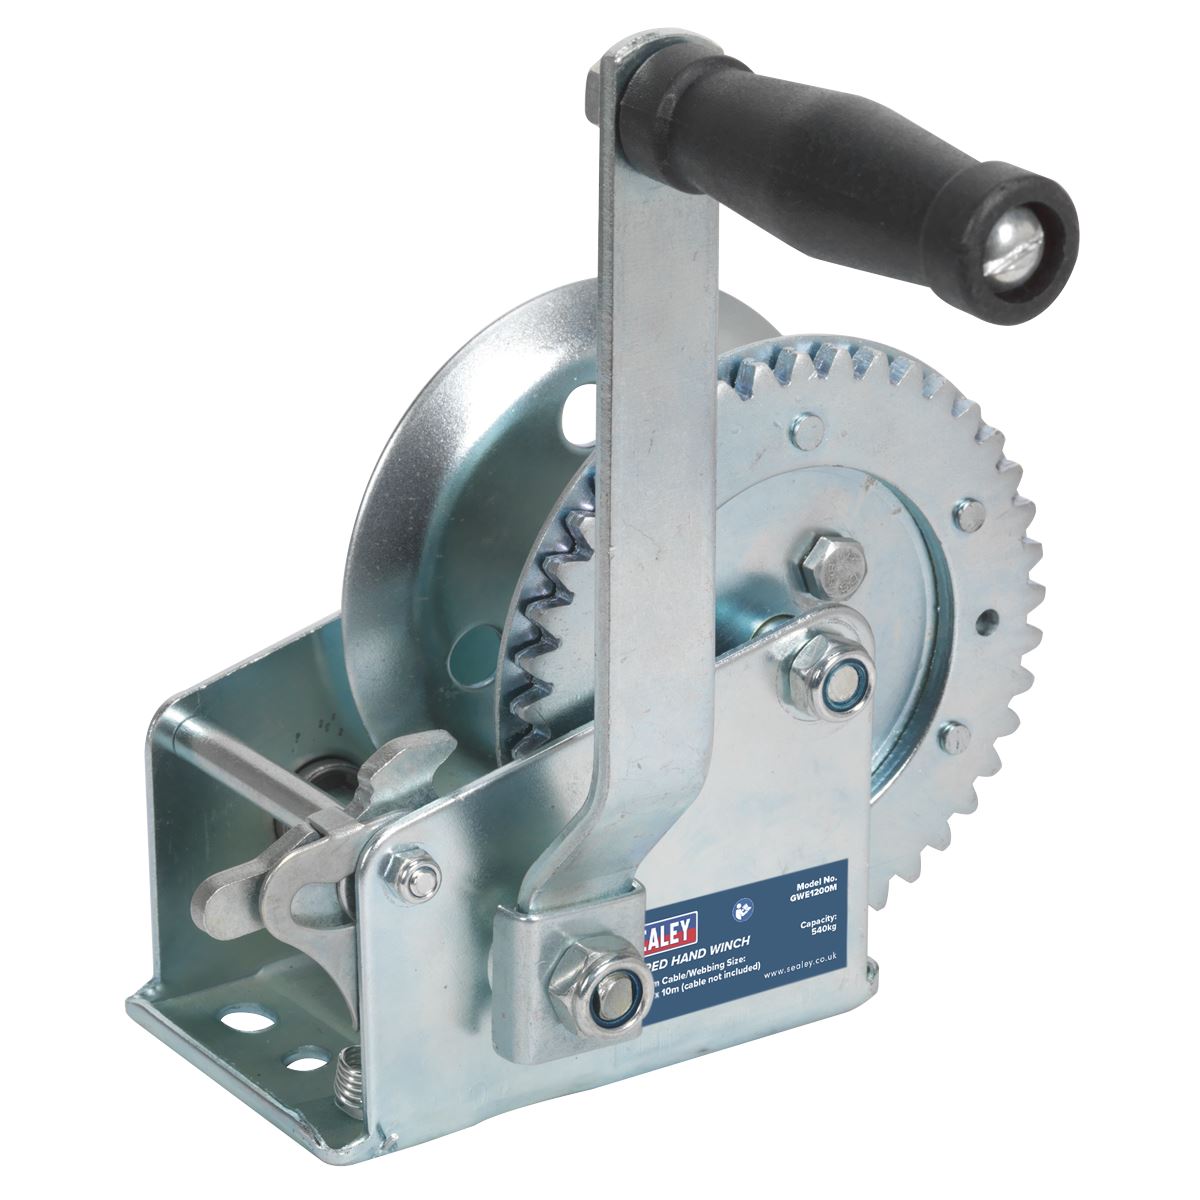 Sealey Geared Hand Winch 540kg Capacity